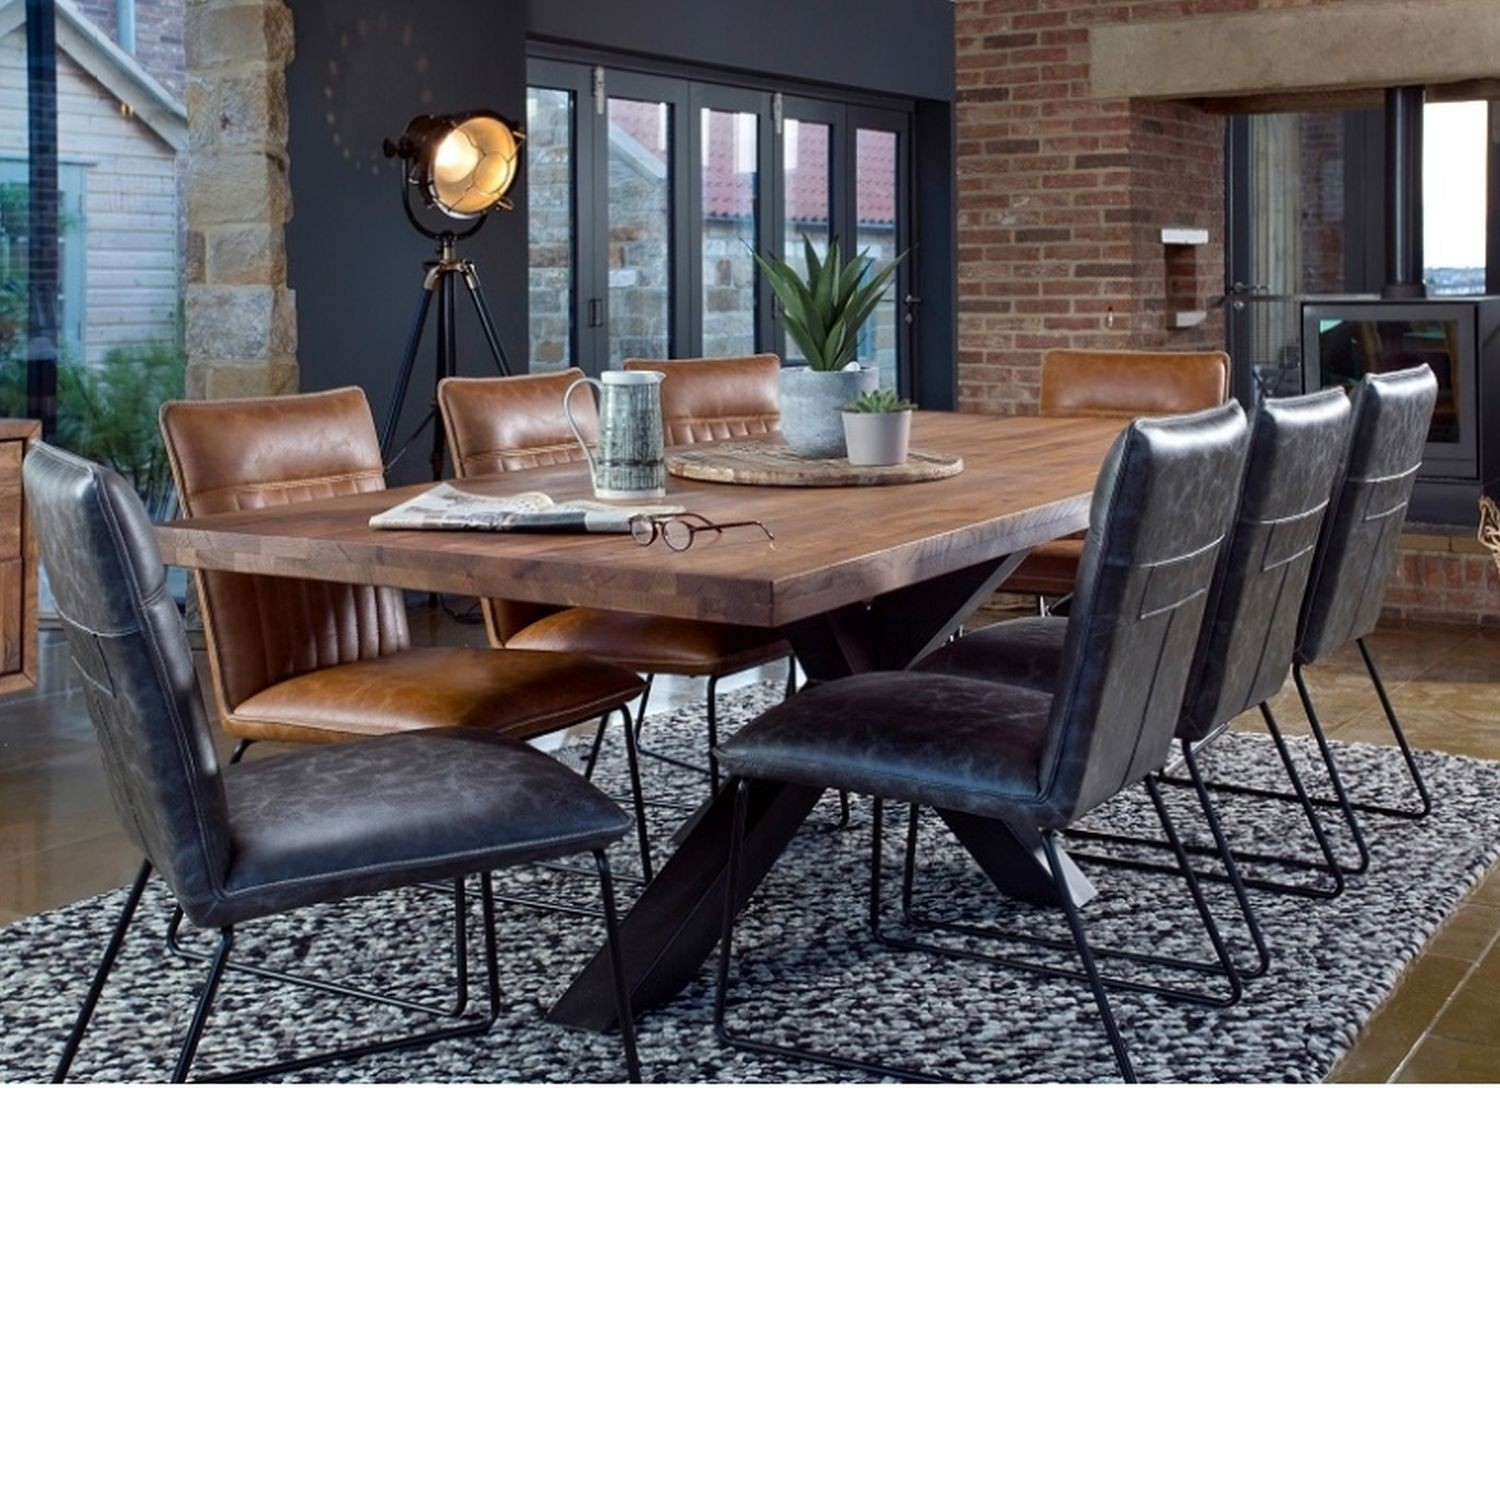 Casa Brixton Dining Table 6 Chairs Dining Set pertaining to sizing 1500 X 1500